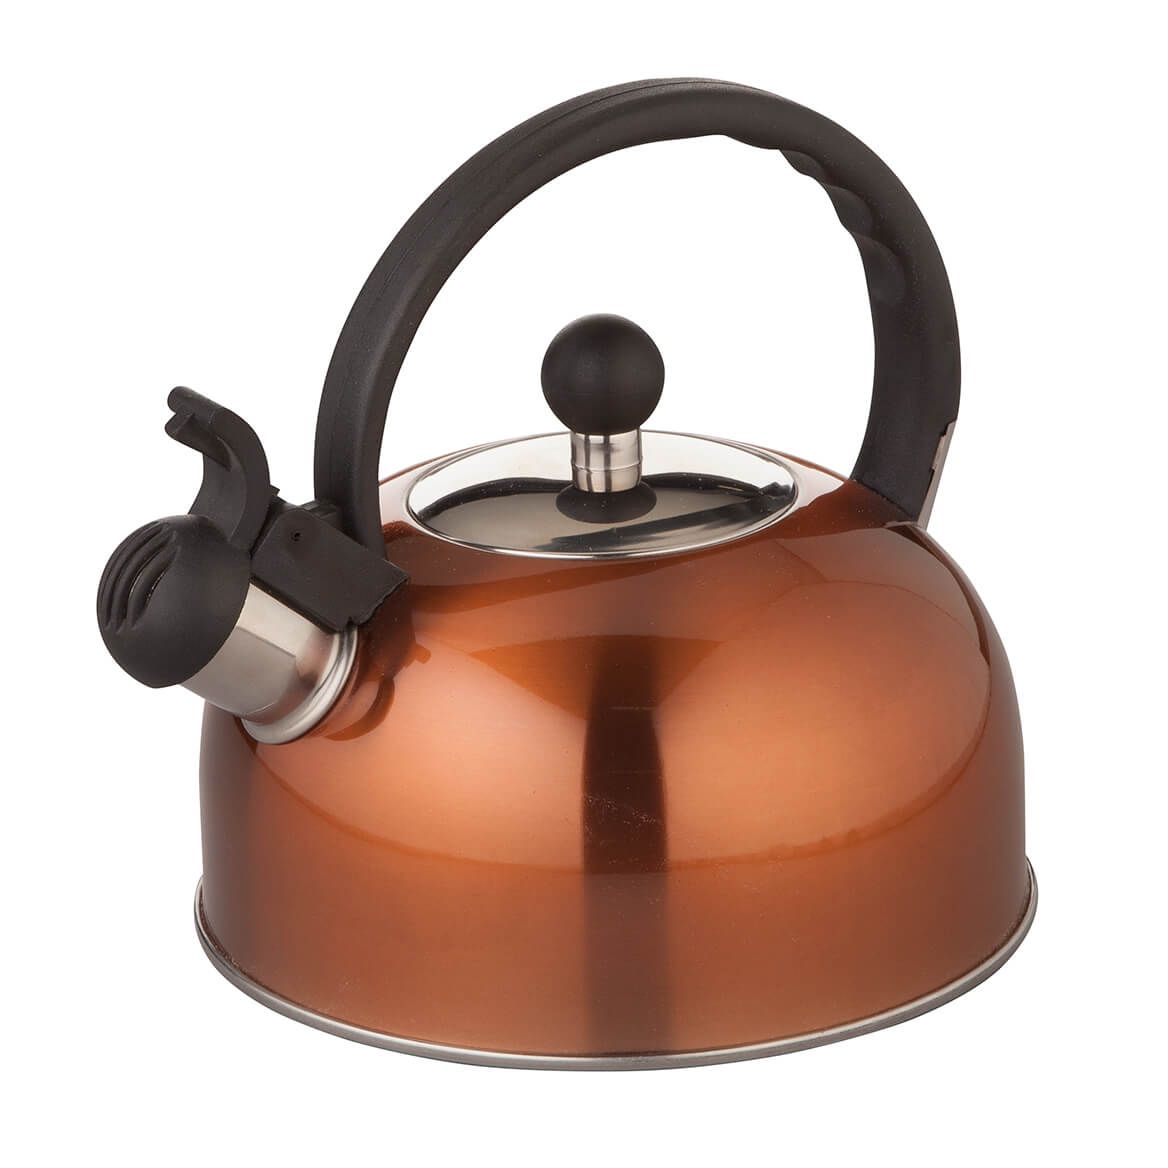 Copper Color Whistling Tea Kettle by Home Marketplace + '-' + 365925